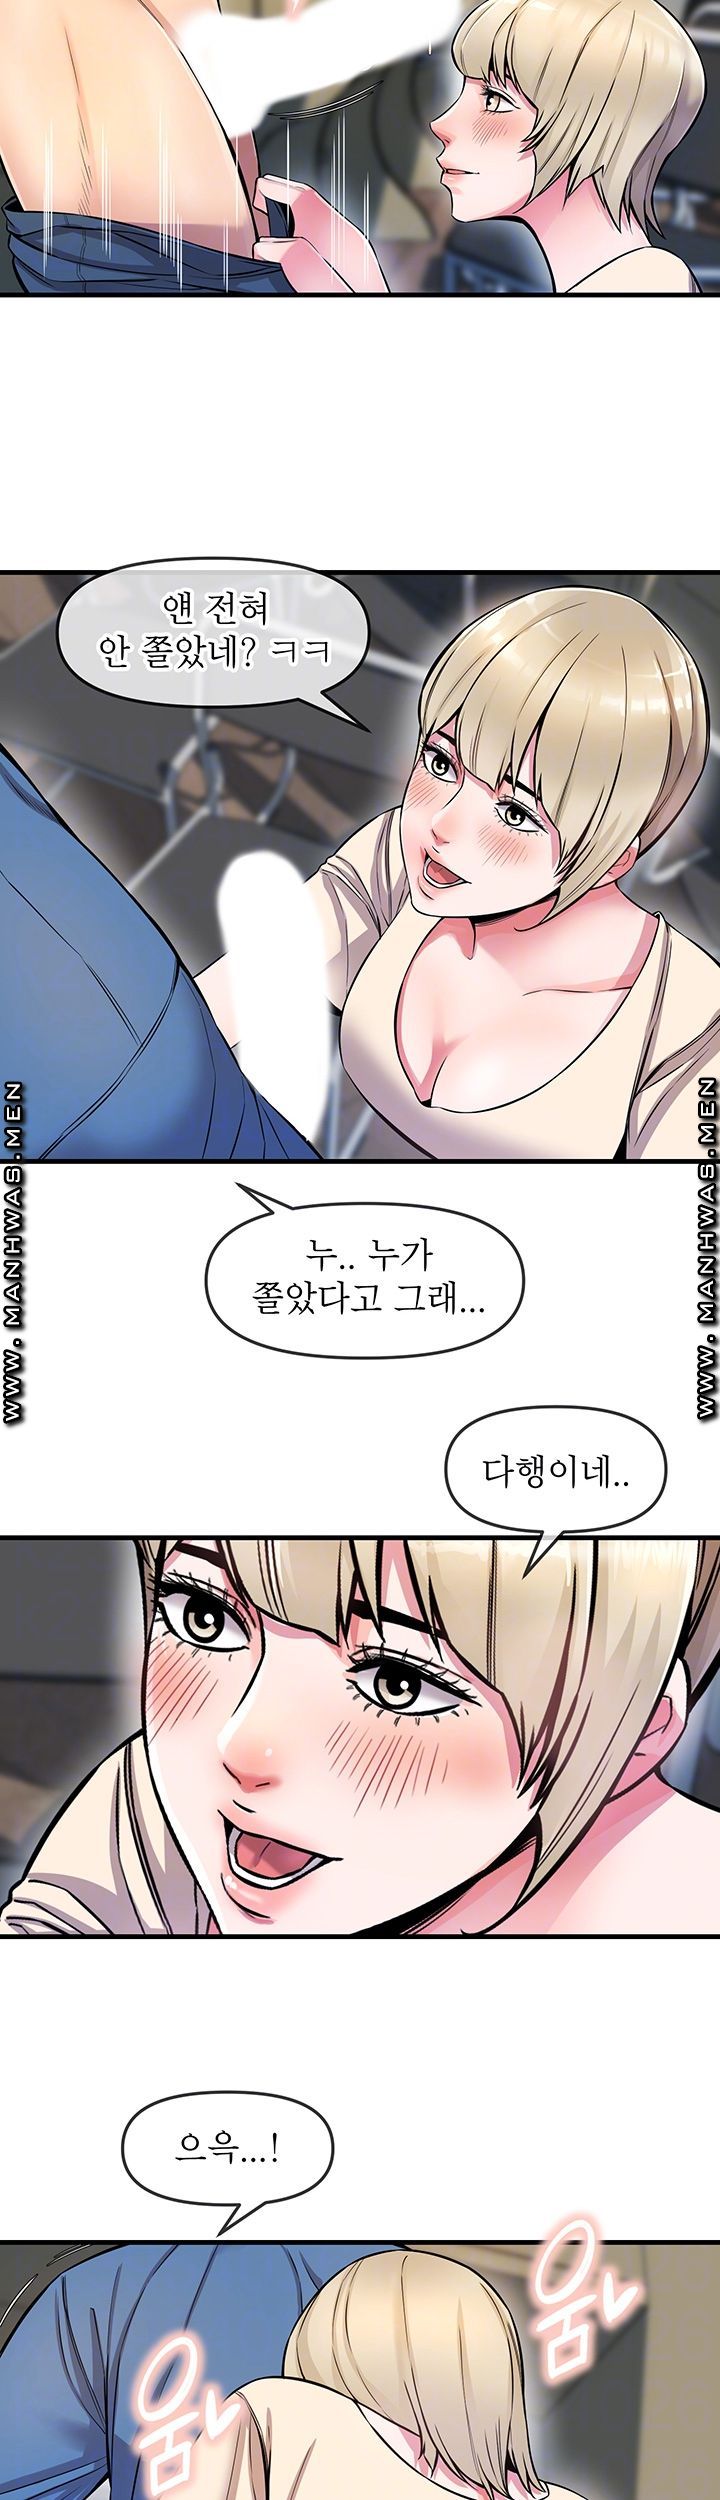 Boss of Reading Room Raw - Chapter 4 Page 6